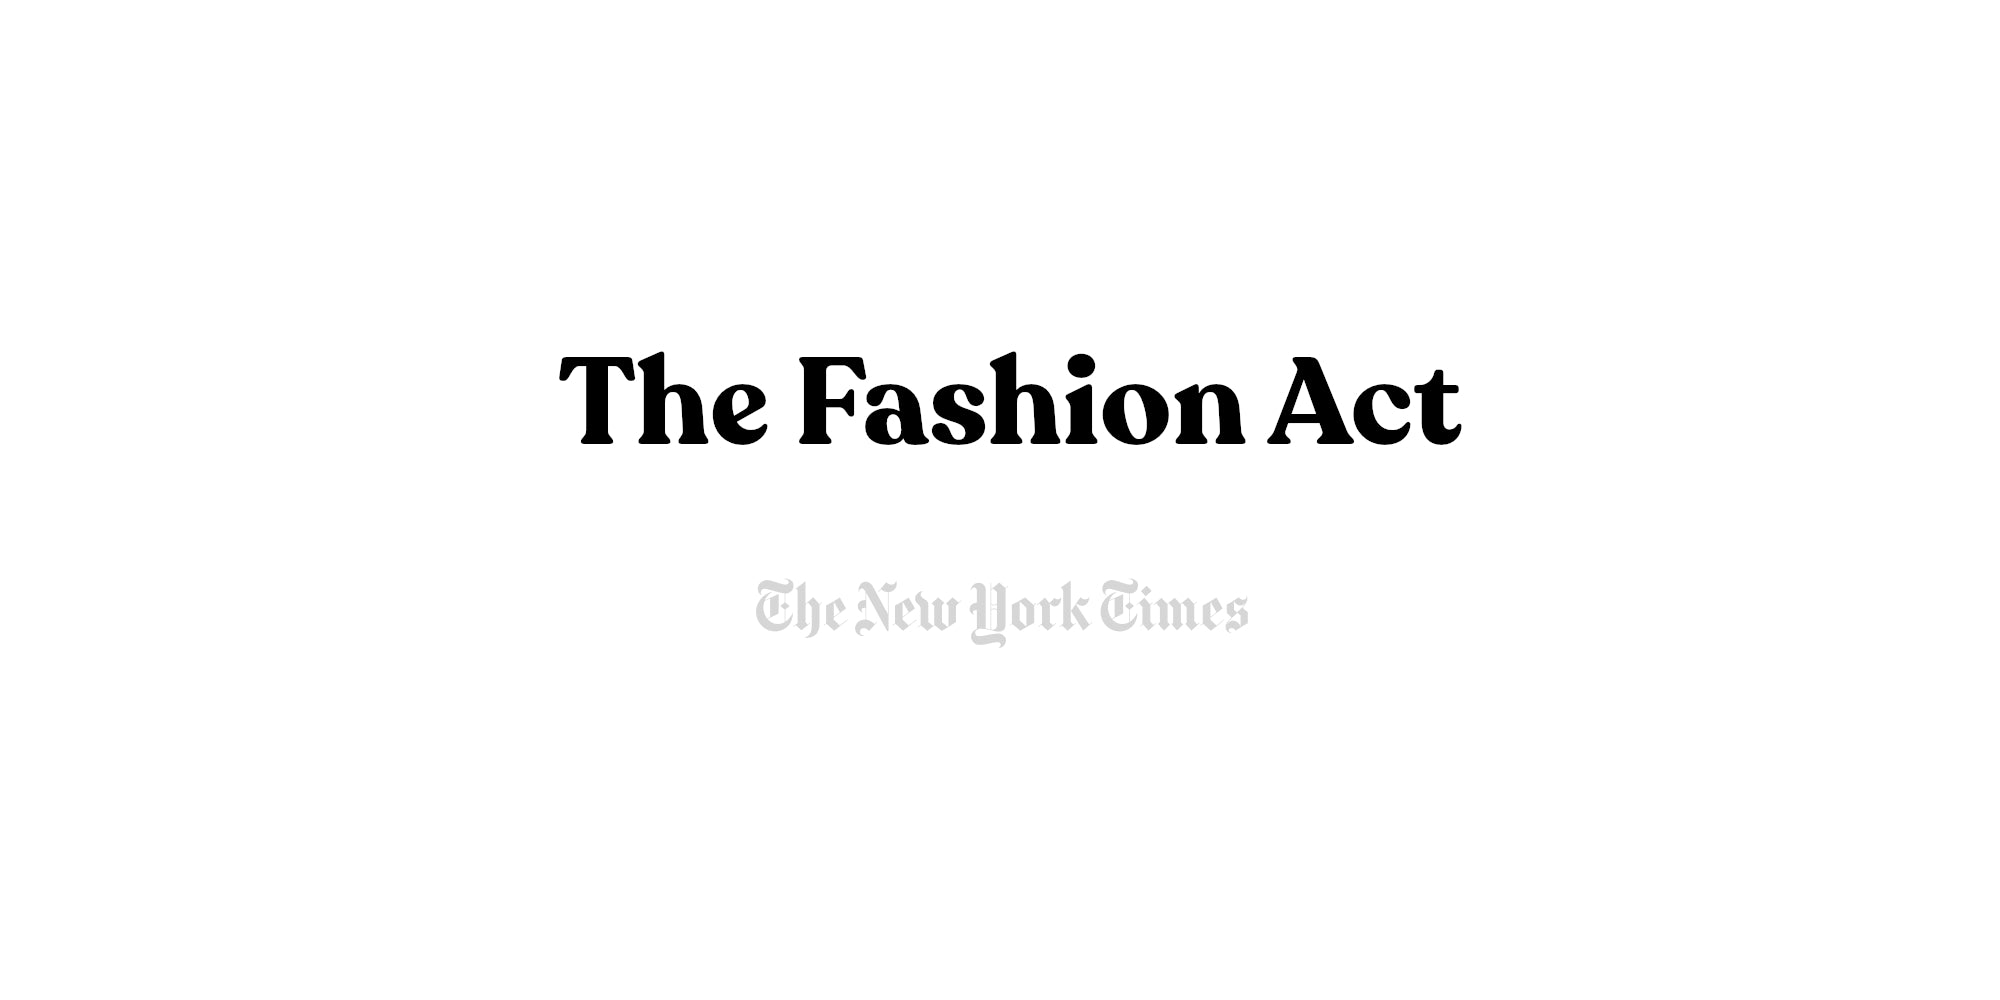 The Fashion Act